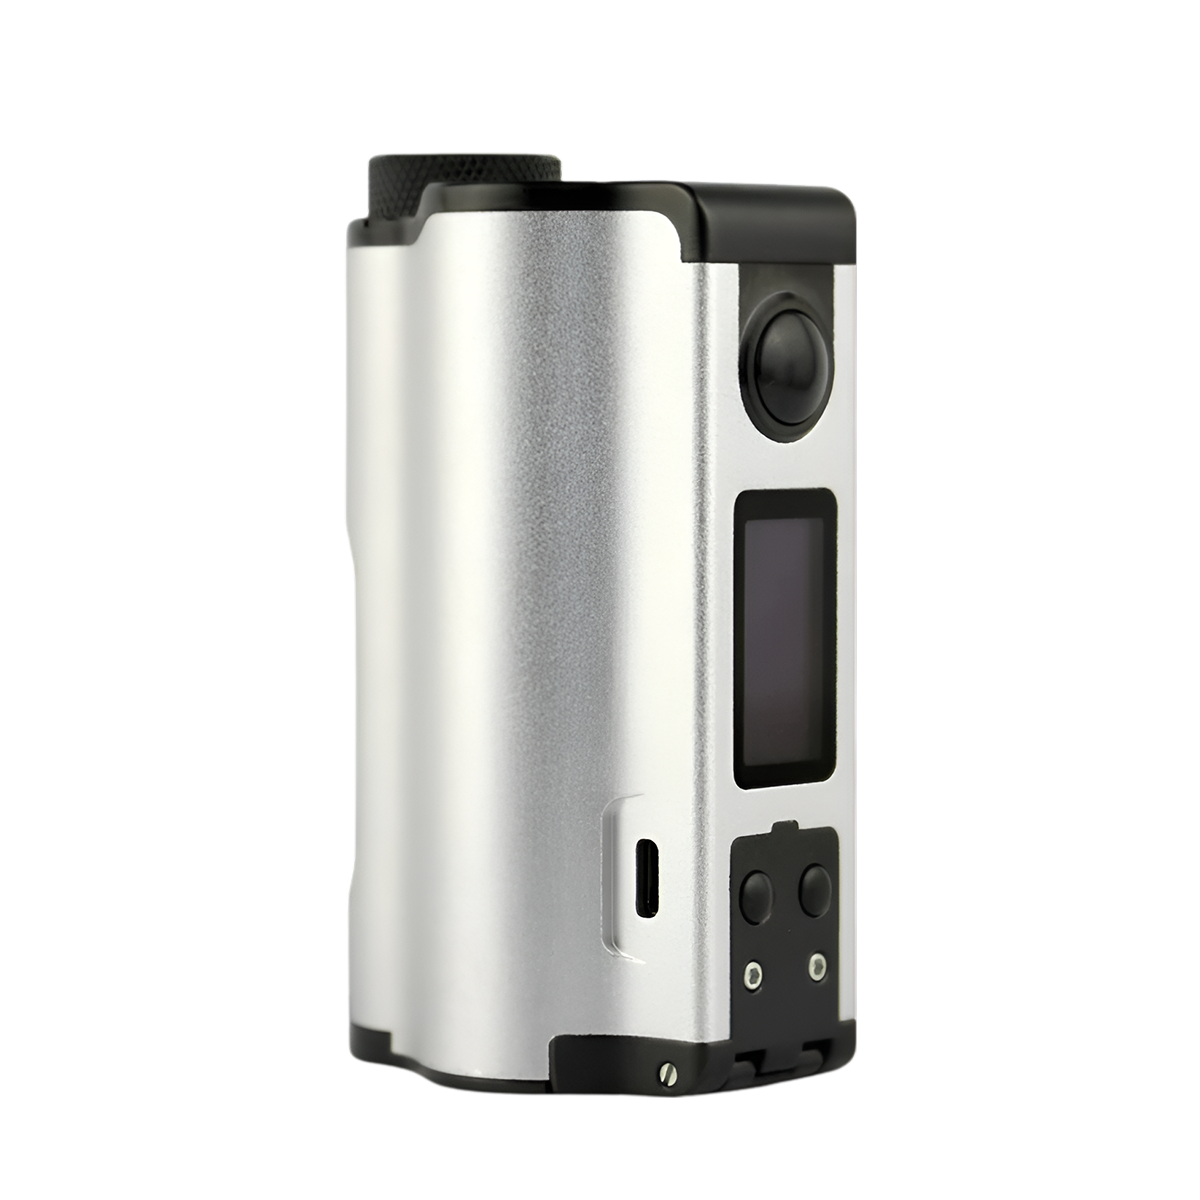 Dovpo Topside Dual Top Fill Squonk Box-Mod Kit Silver  